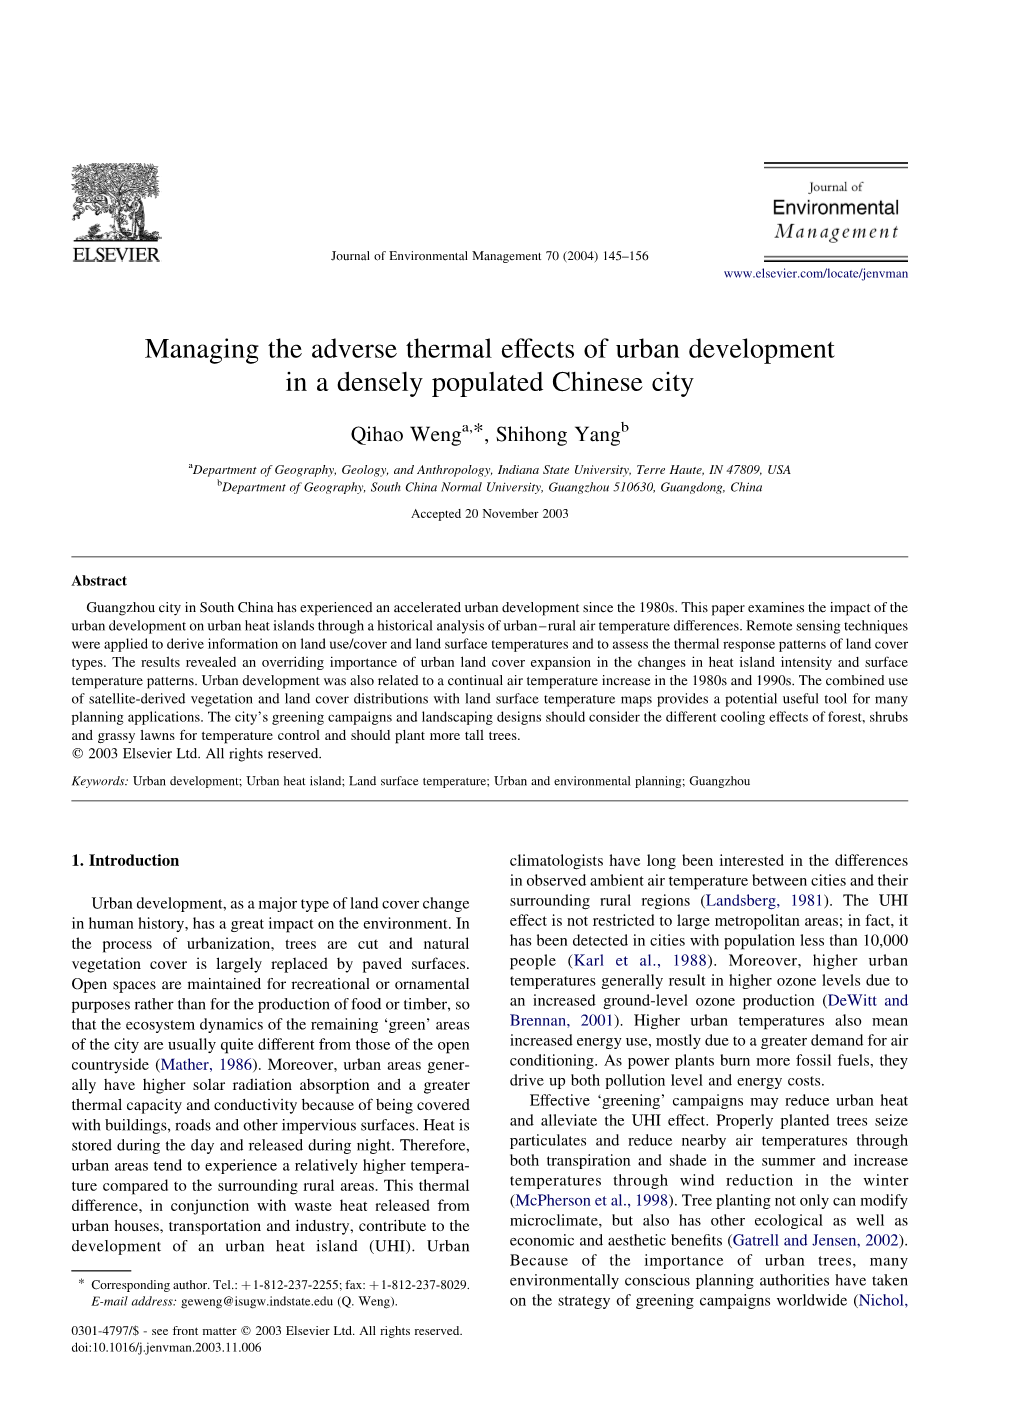 Managing the Adverse Thermal Effects of Urban Development in a Densely Populated Chinese City